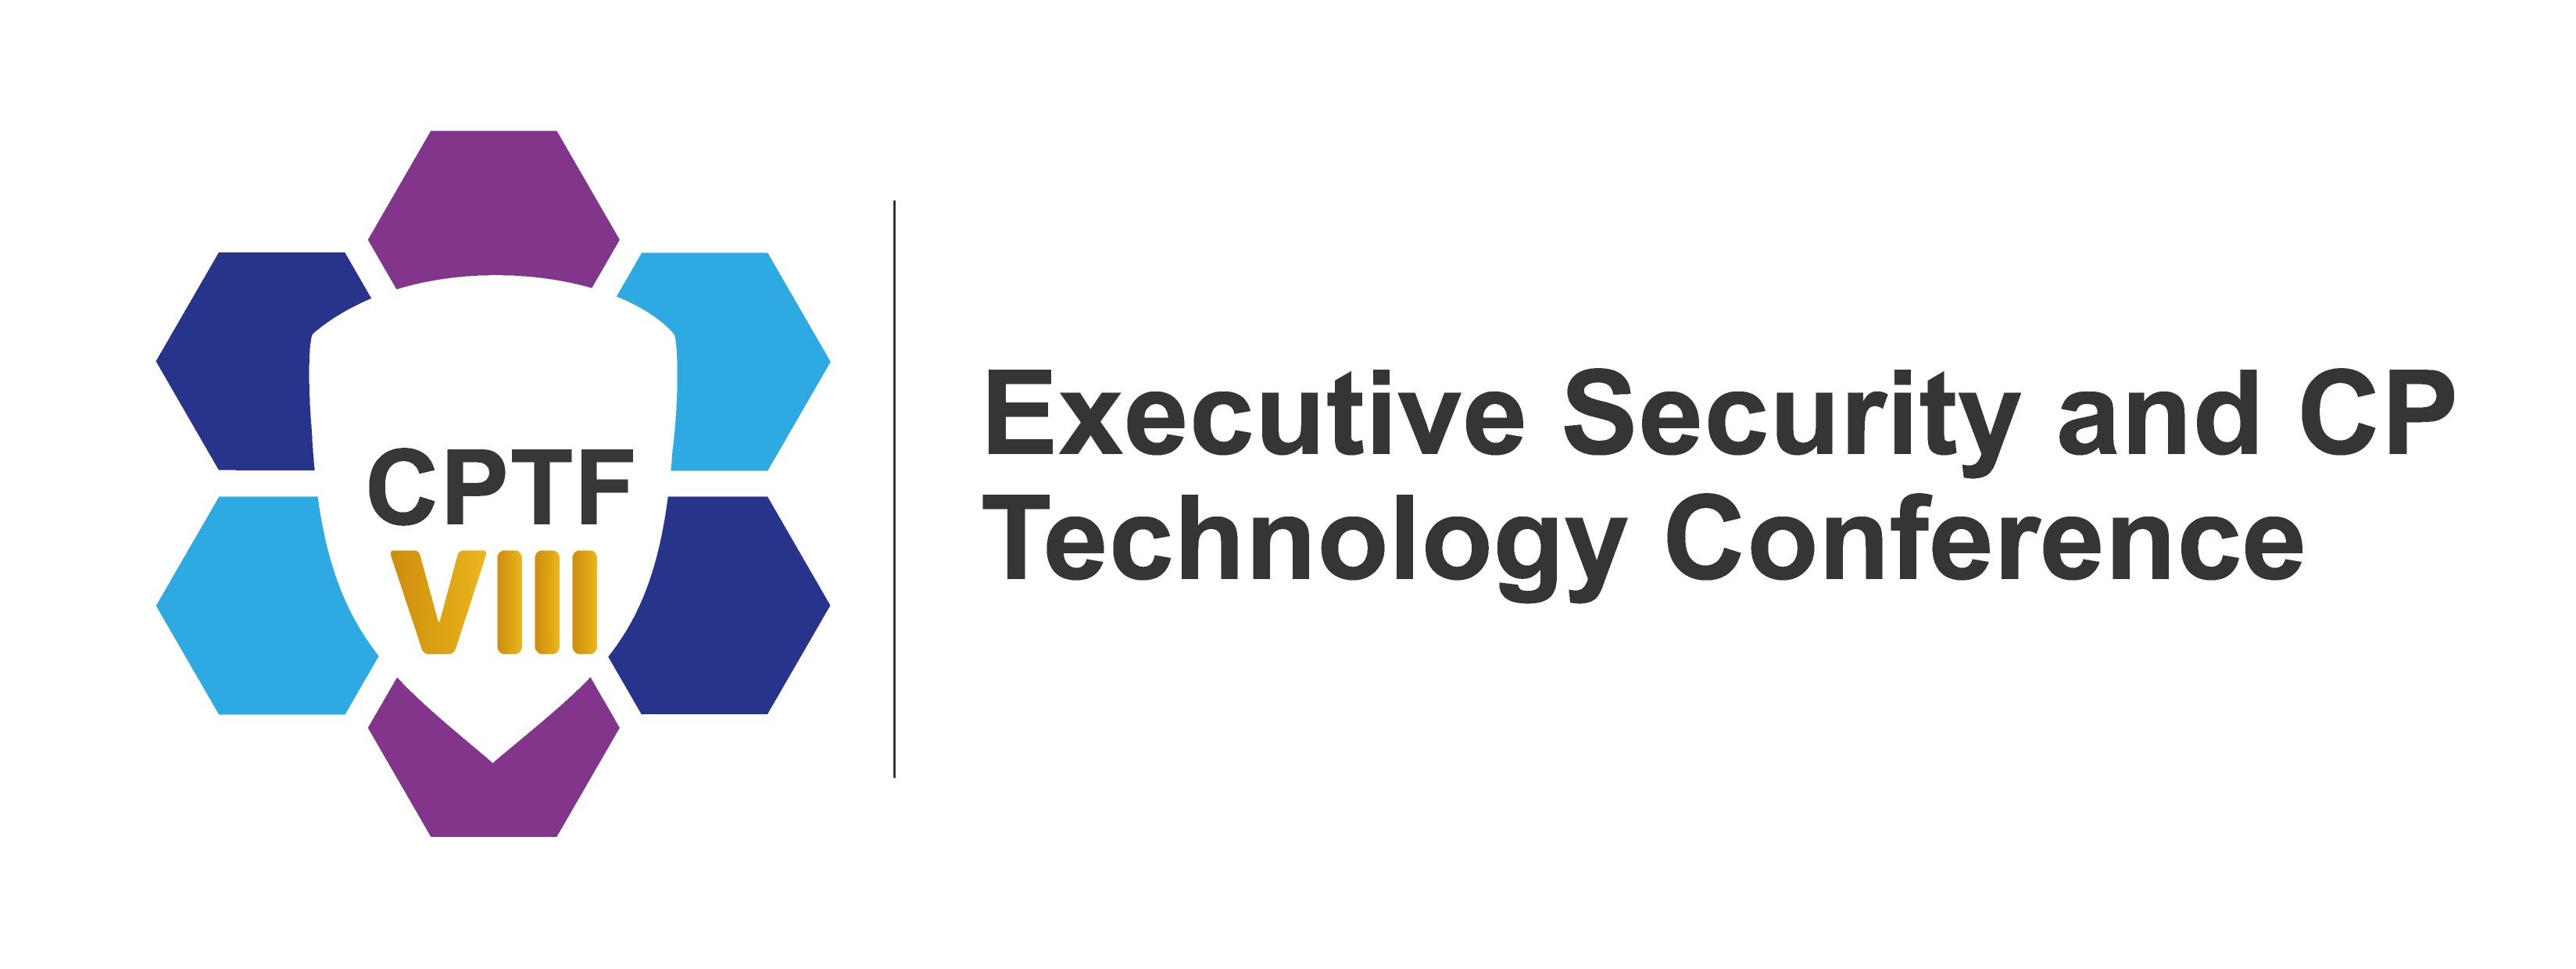 Executive Security and CP Technology Forum